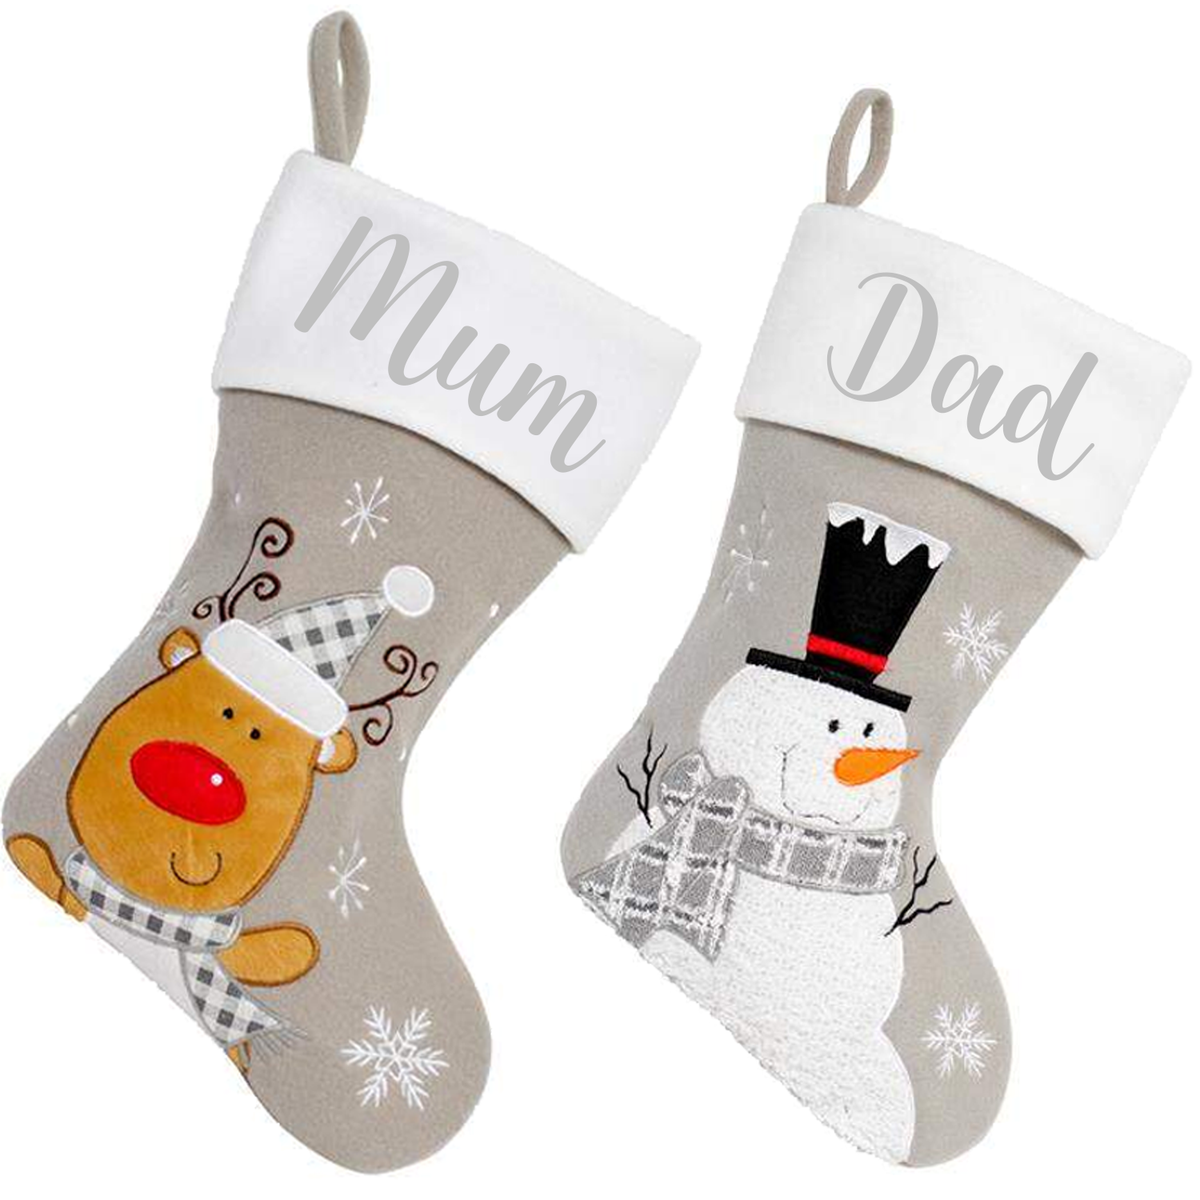 Deluxe Silver Theme Personalised Stocking